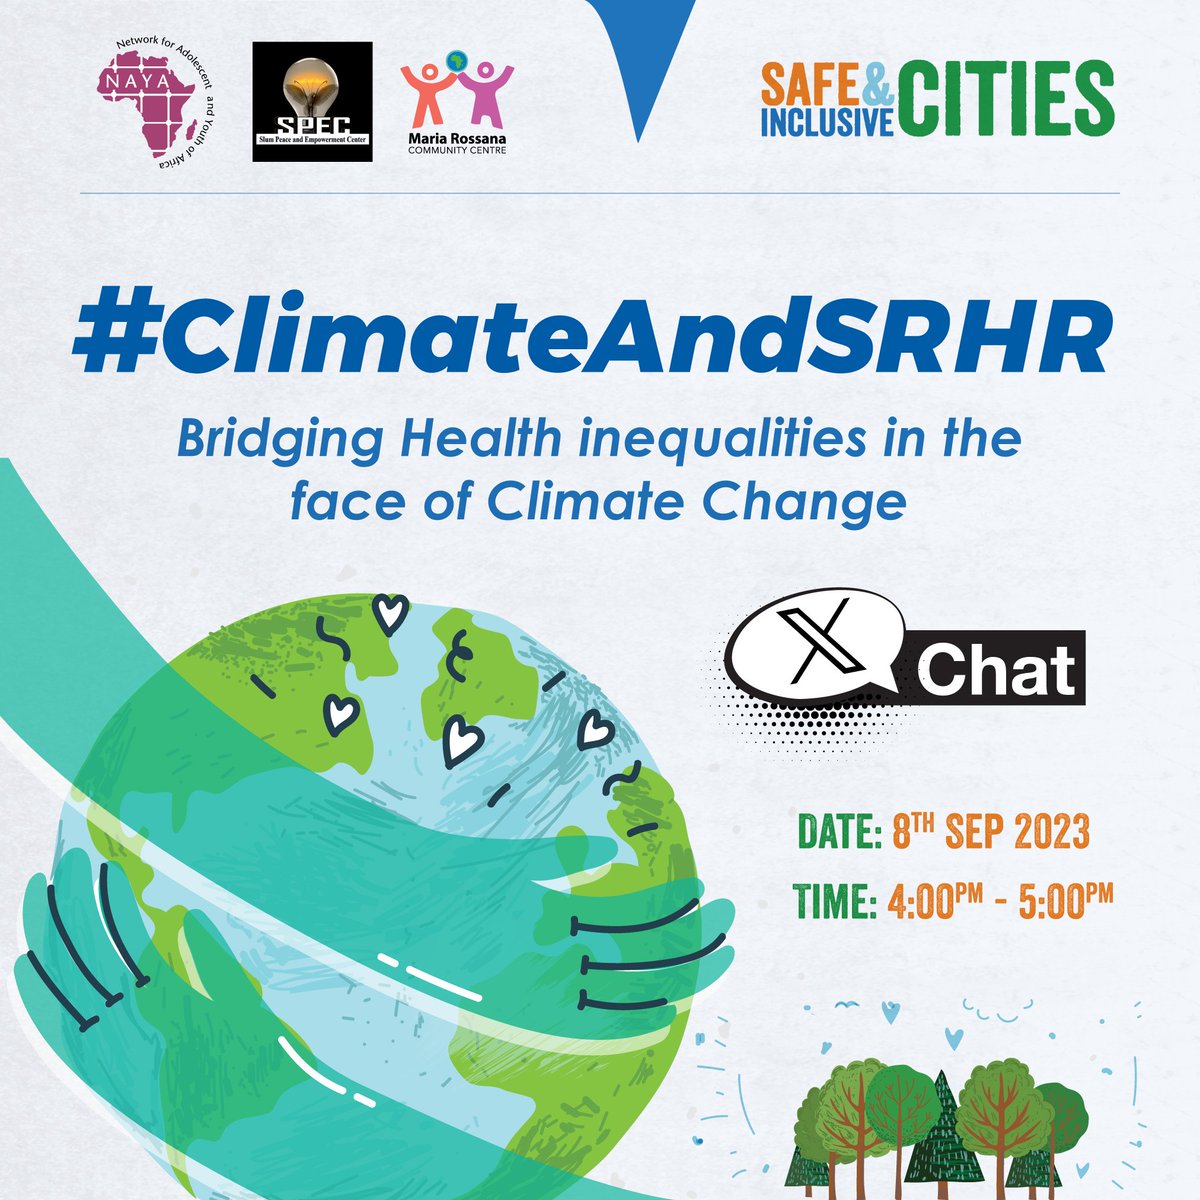 Let's discuss how we can bridge health inequalities in the face of climate change.
#ClimateAndHealth 
#NAYAVoices